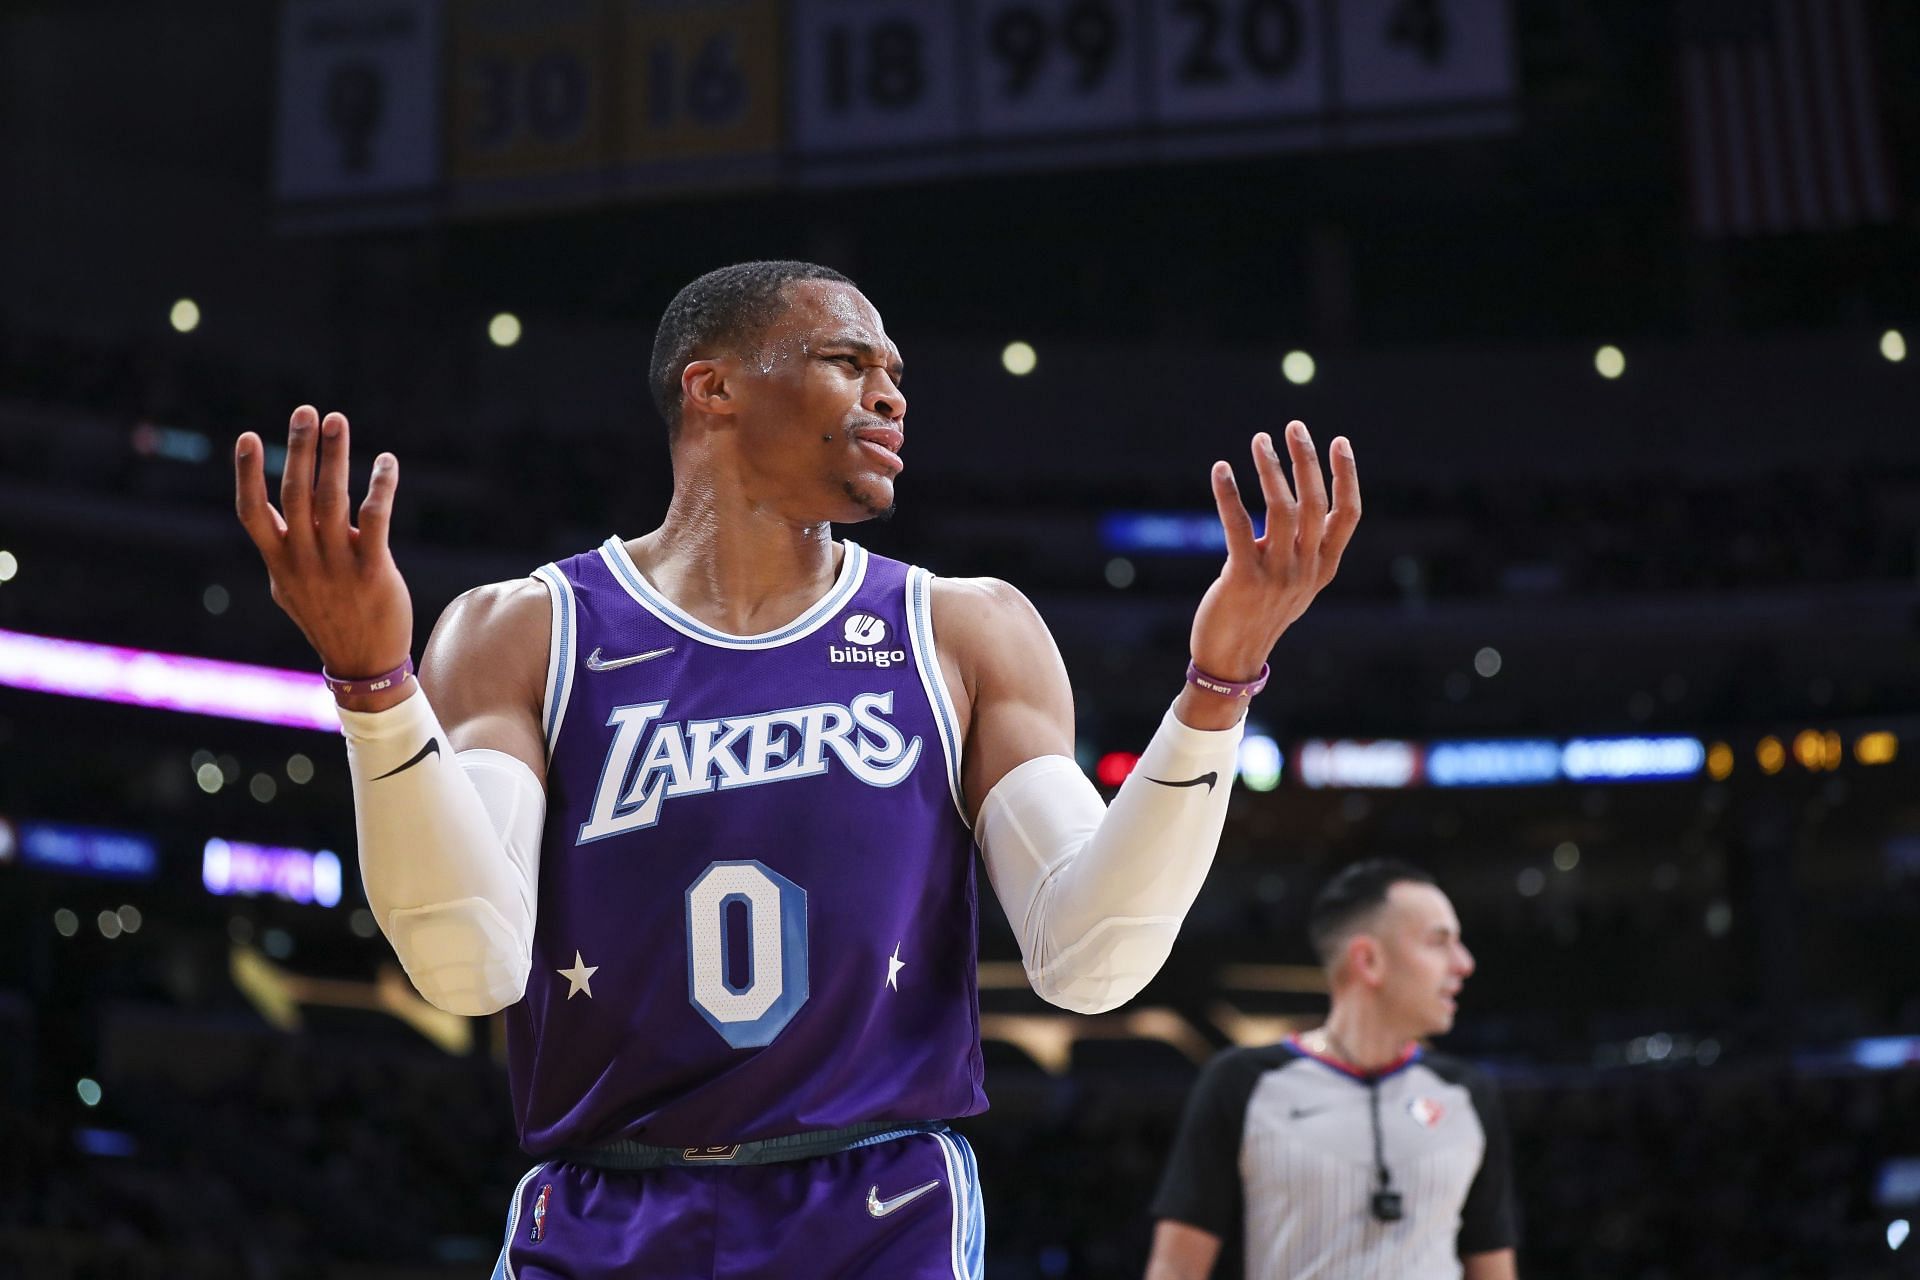 Russell Westbrook #0 of the Los Angeles Lakers reacts to a call in the second half at Crypto.com Arena on January 07, 2022 in Los Angeles, California.